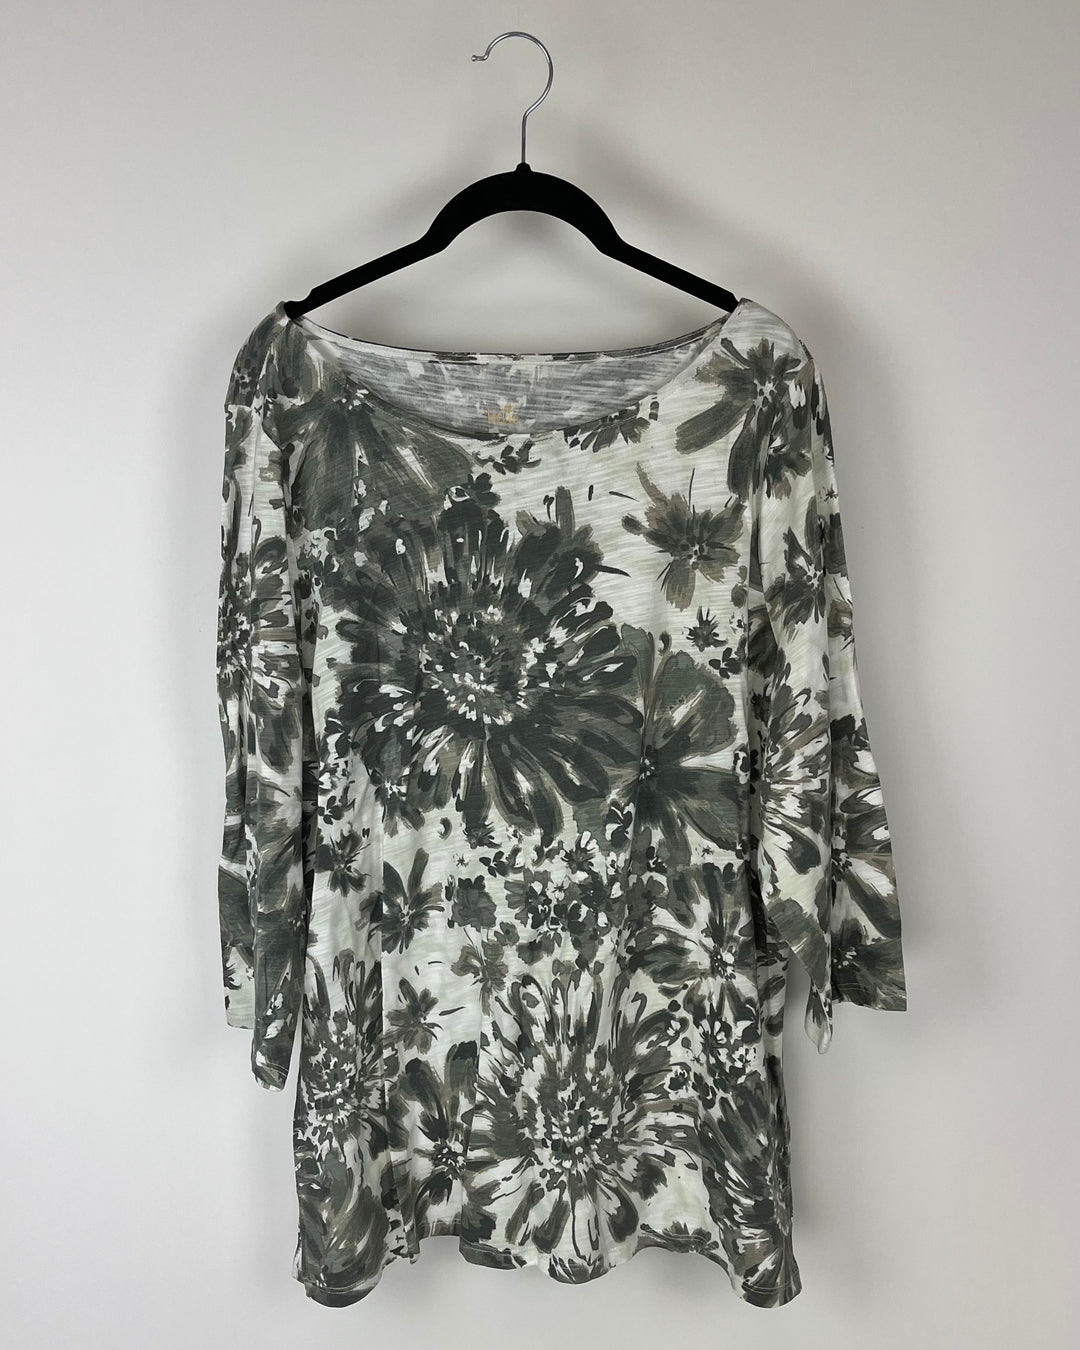 Green and White Floral Top - Size 14-16